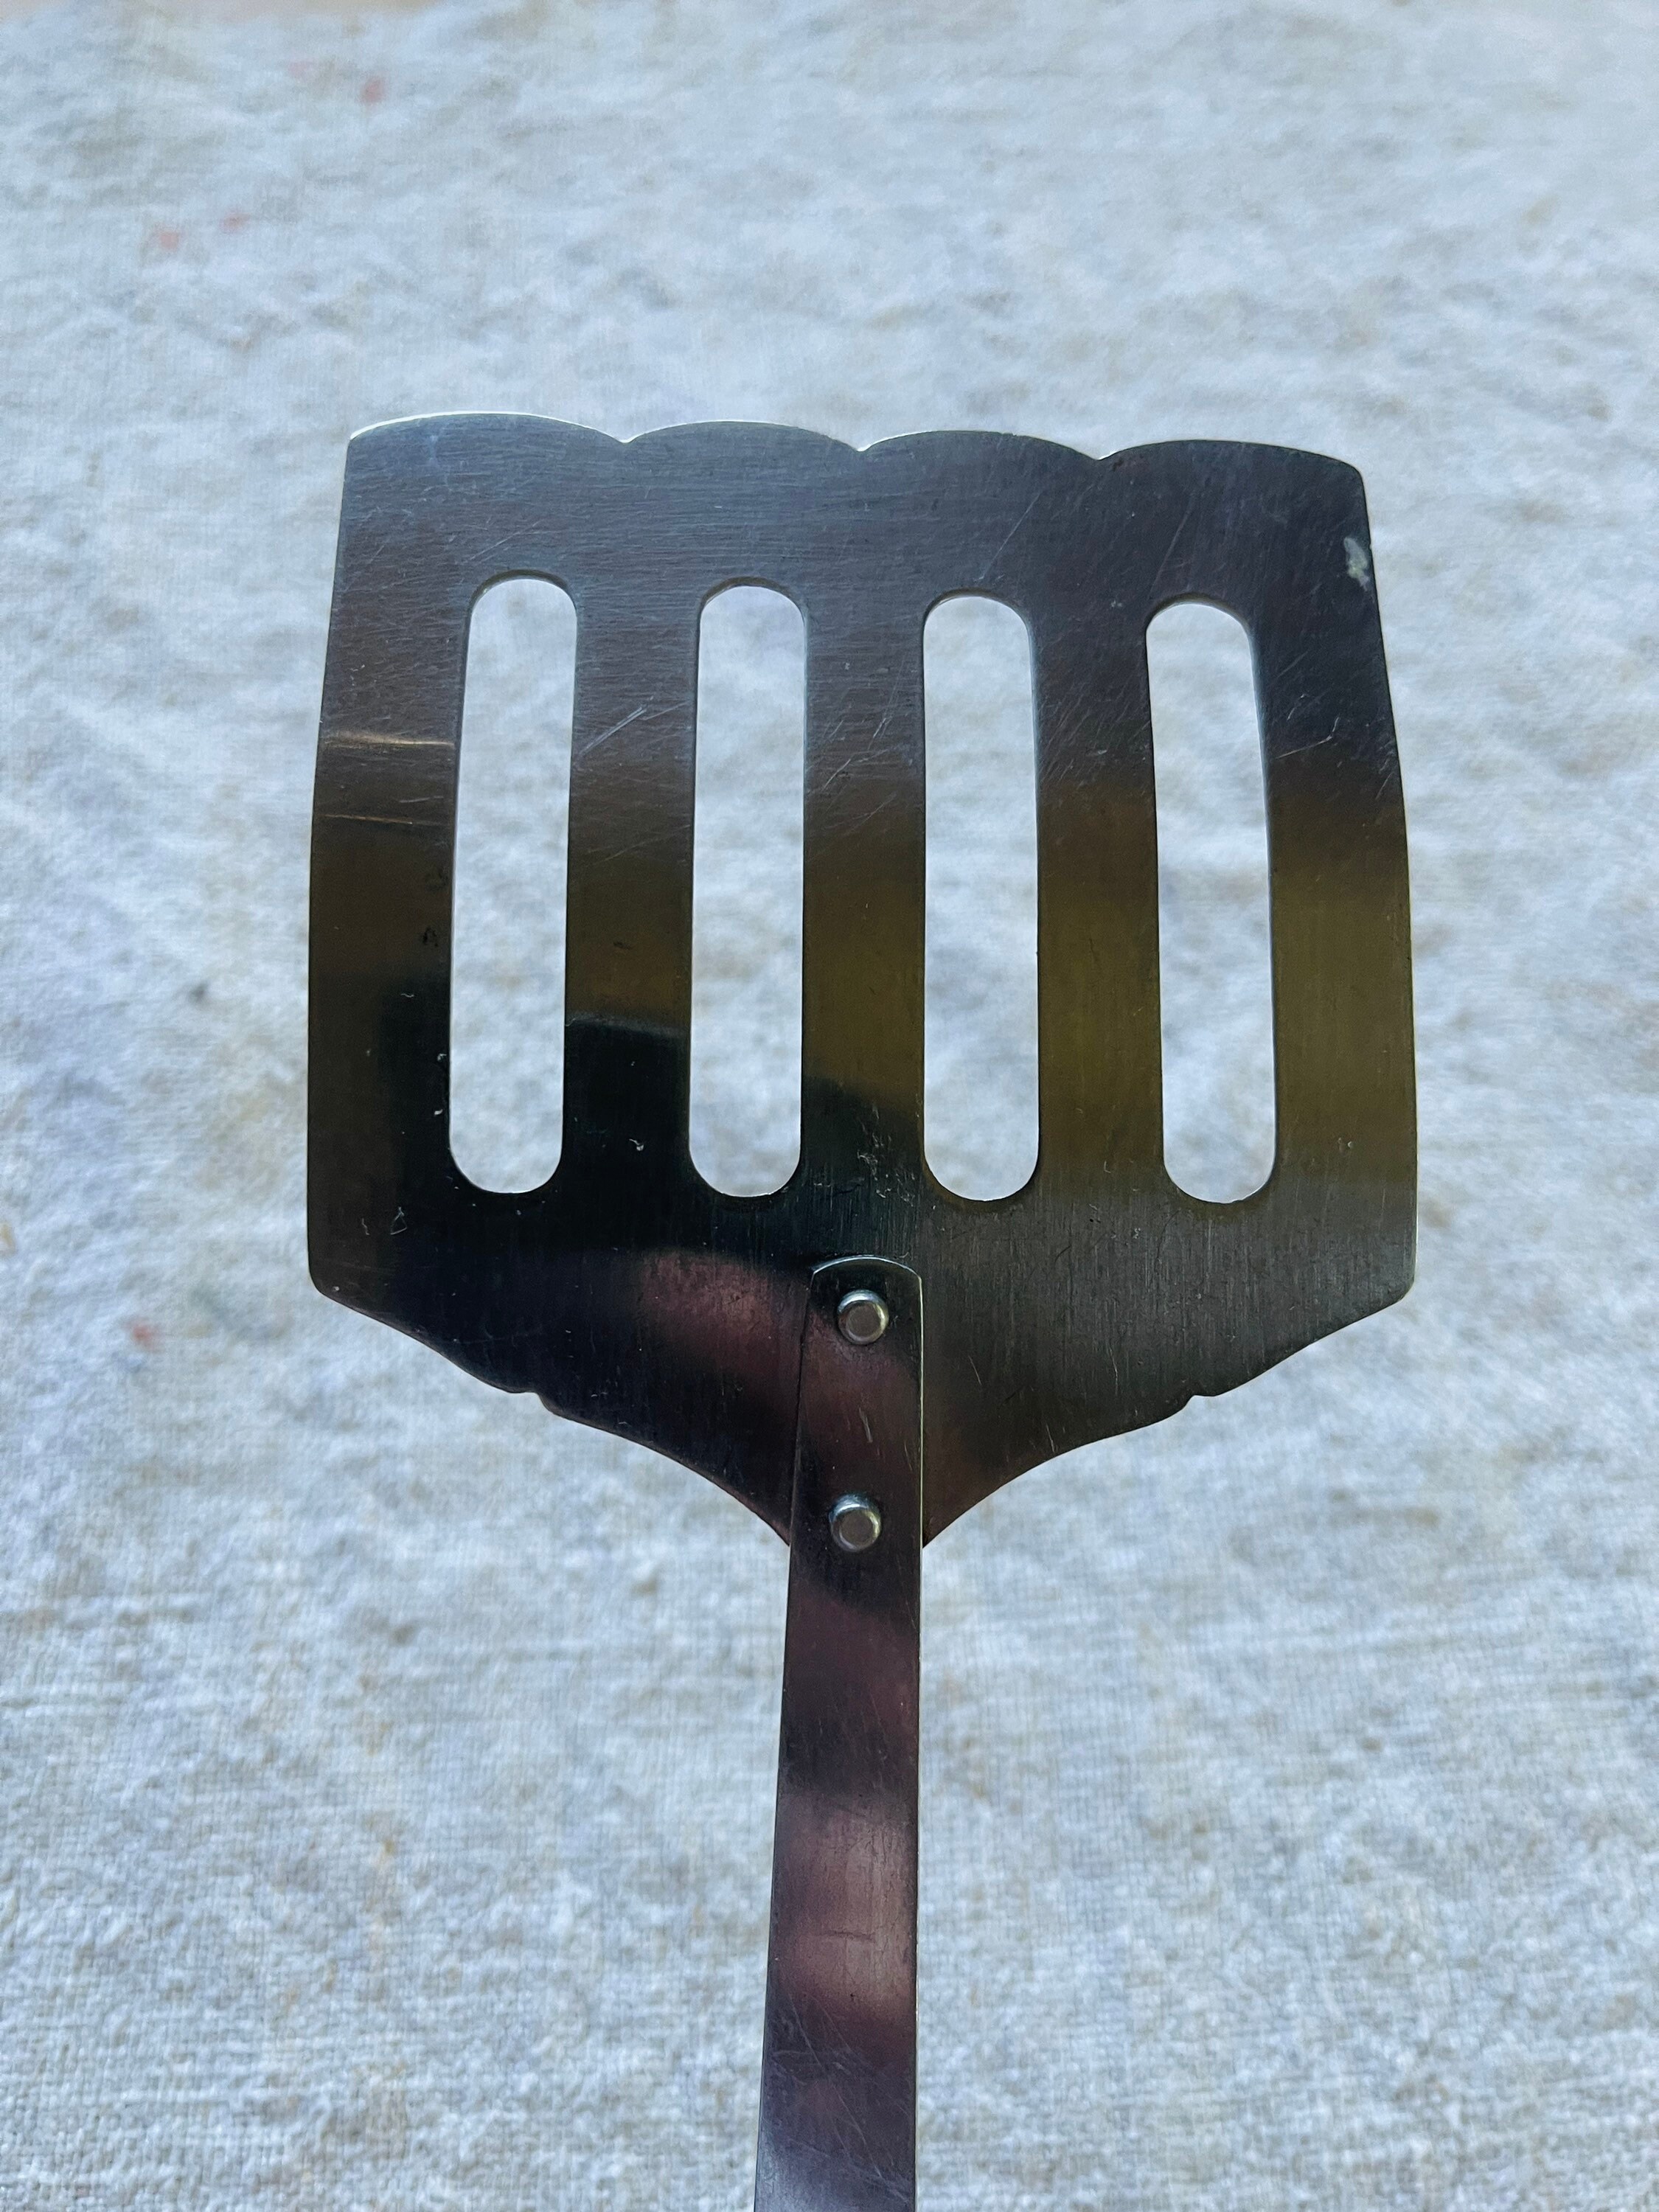 Authentic Vintage Flipper Spatula With Wood Handle / Stainless Steel Spatula  With Wooden Handle Made in Taiwan 